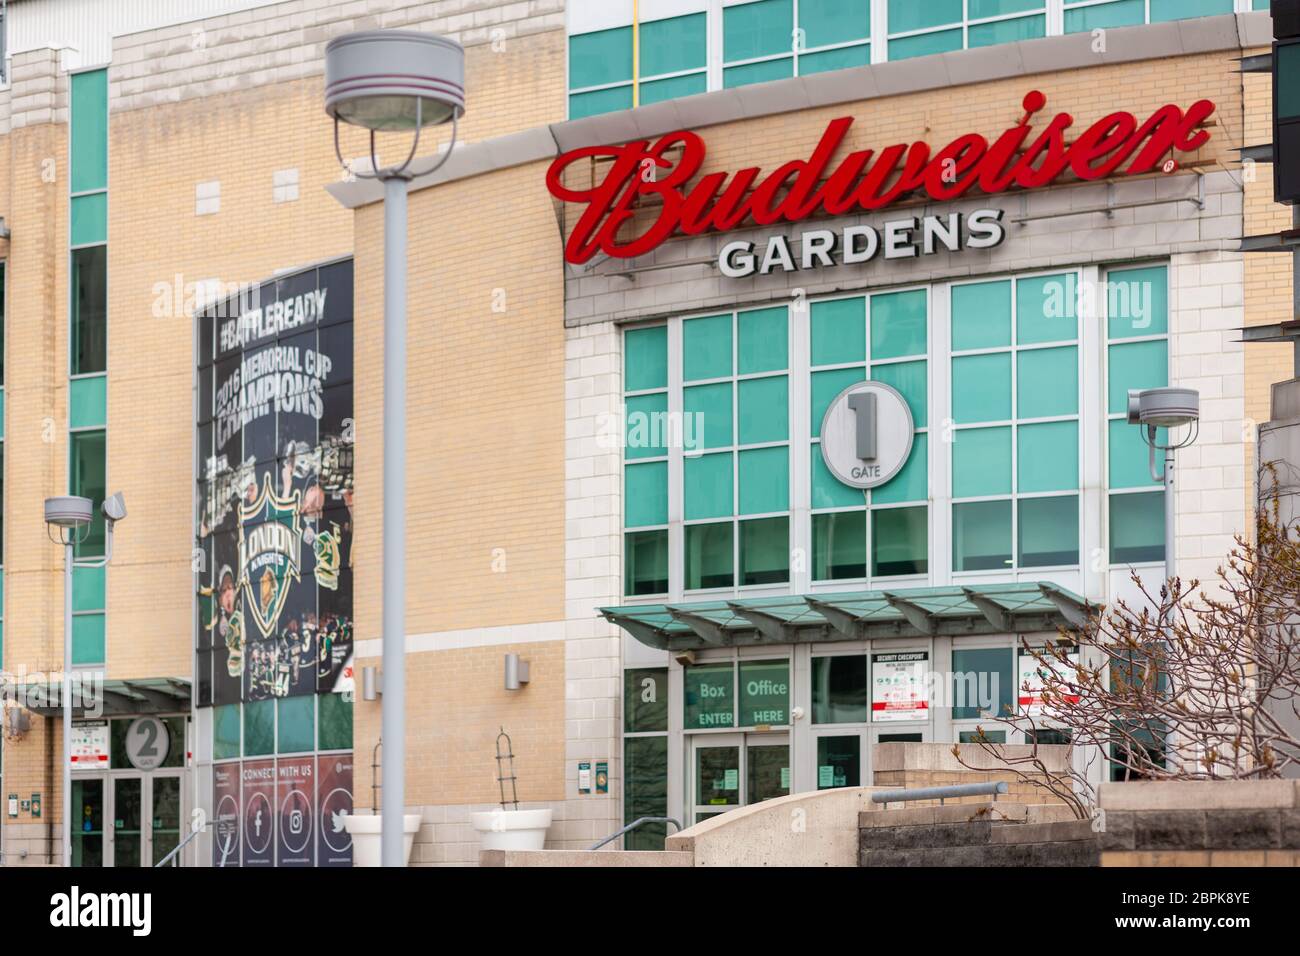 Budweiser Gardens - Home of the London Knights - Empty Stock Photo - Alamy